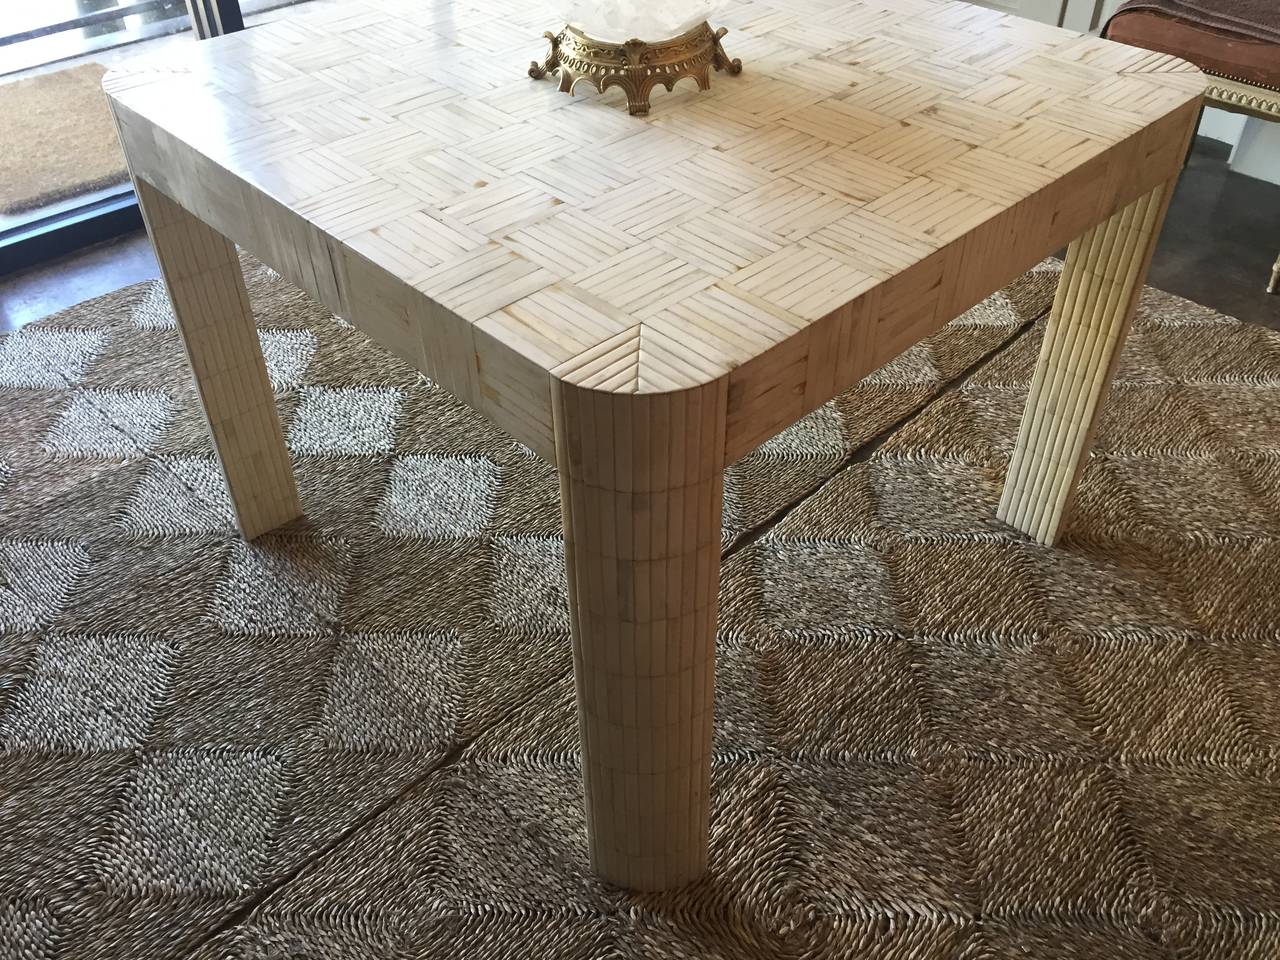 Inlay Karl Springer Style Table with Tessellated Polished Bone Tiles